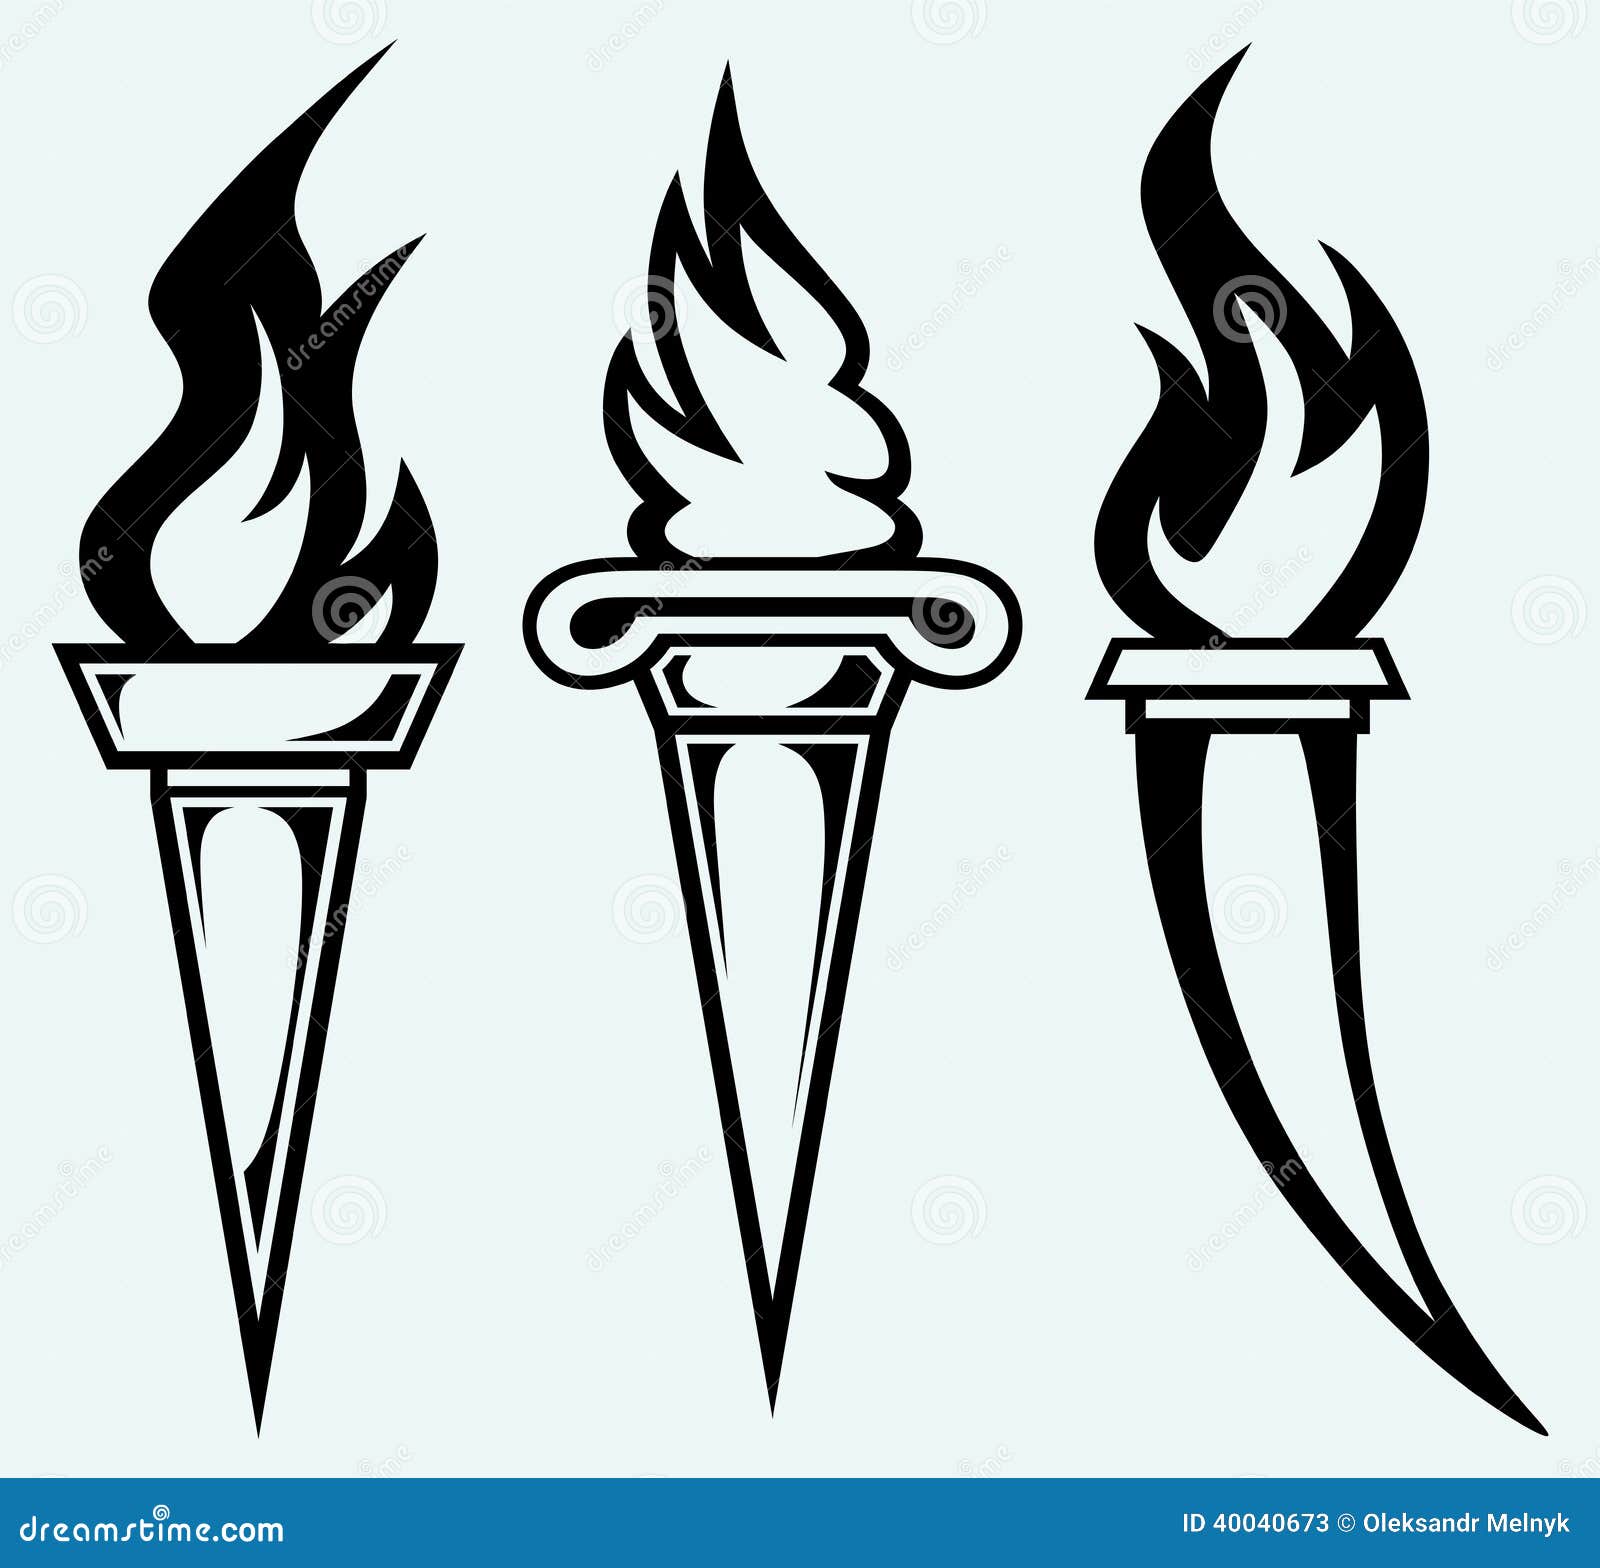 vector clipart torch - photo #35